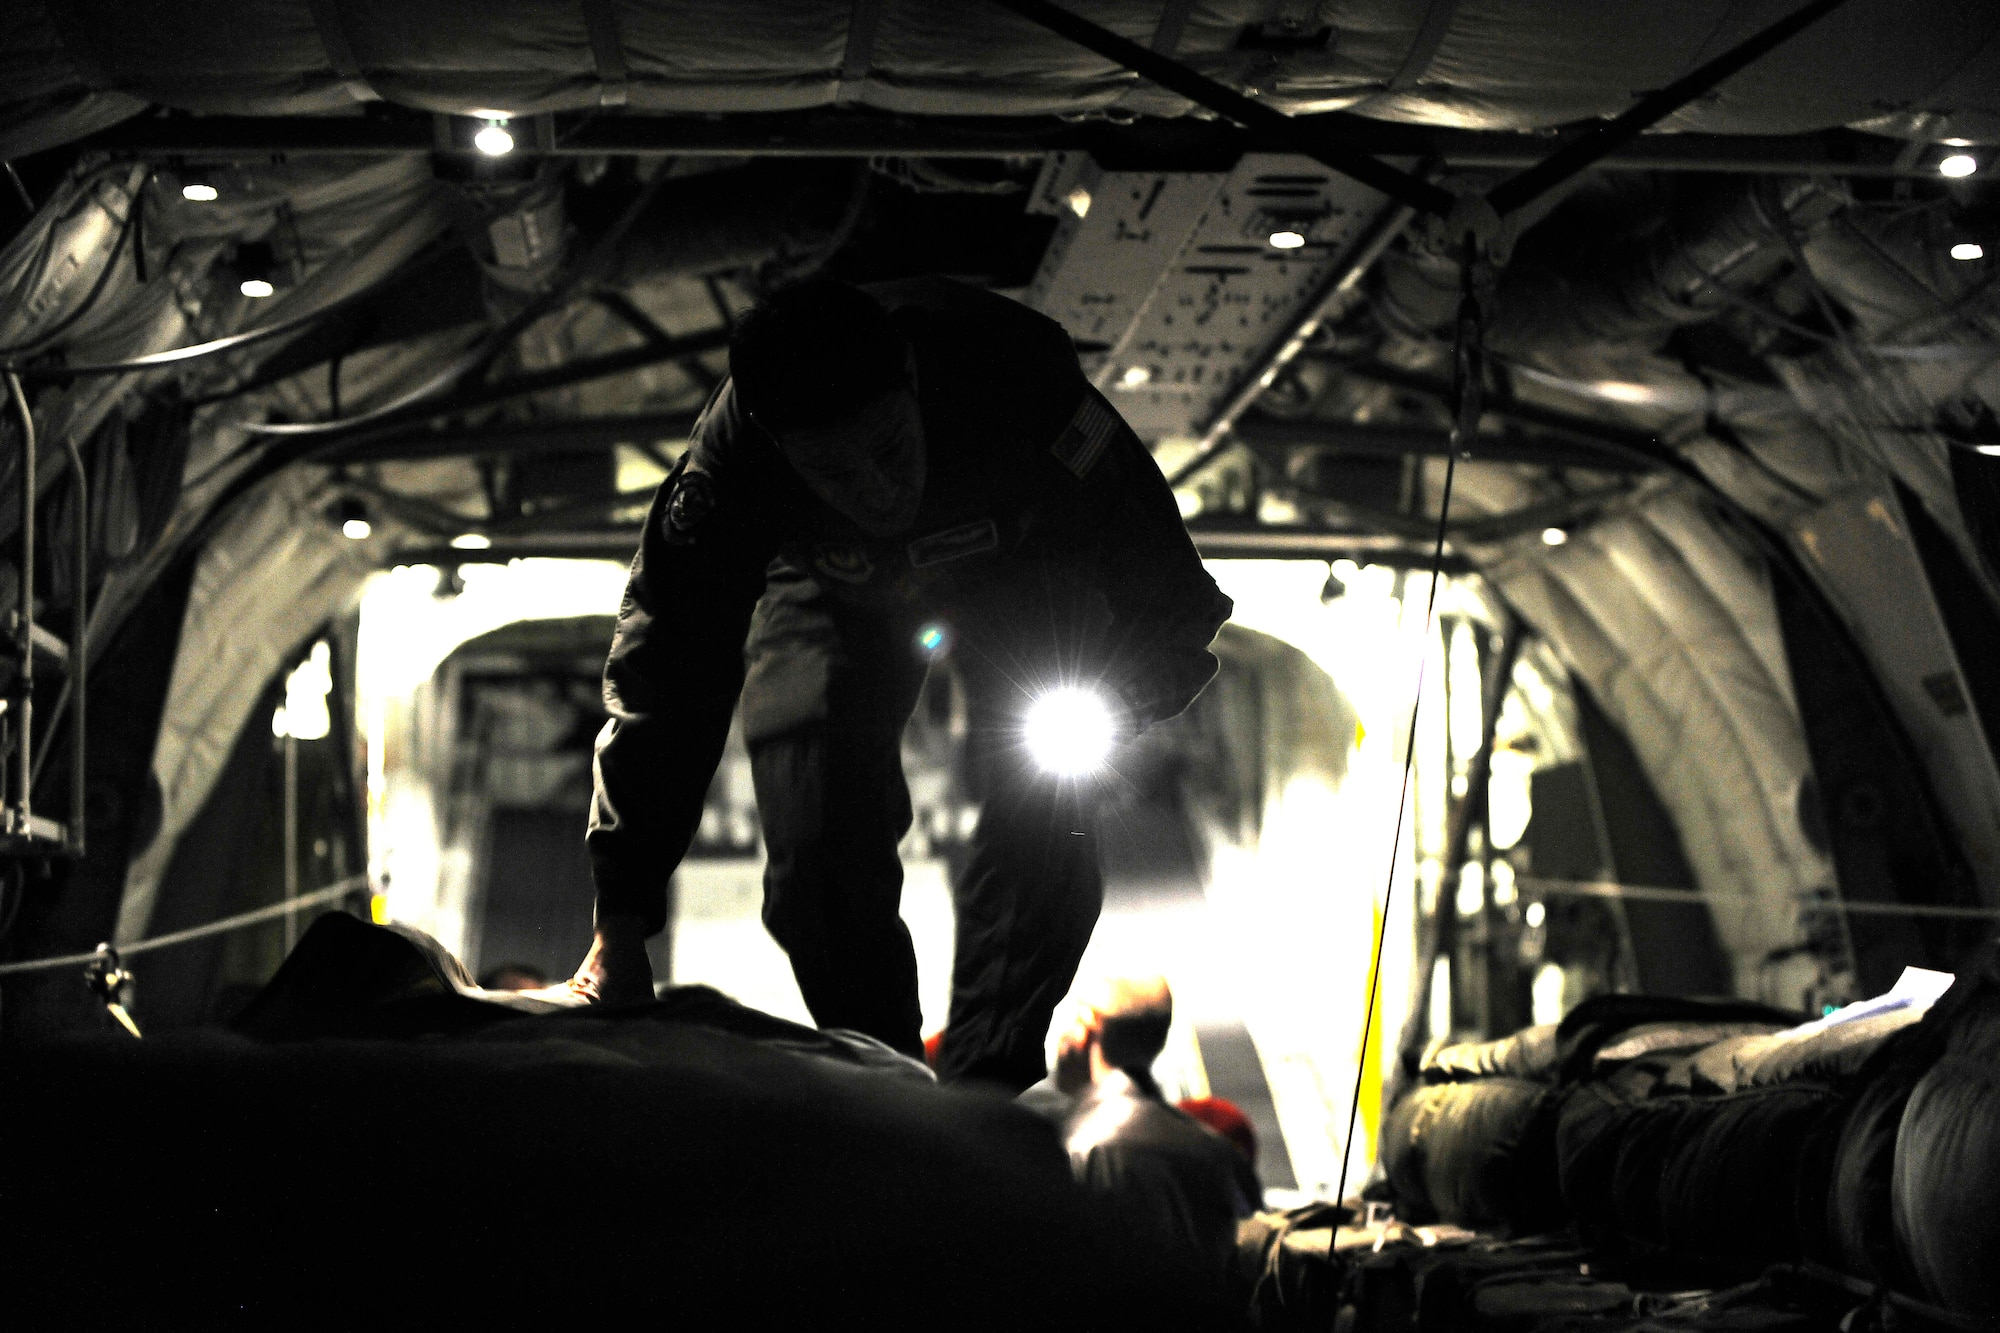 Tech. Sgt. Kepa Kahihikolo, 37th Airlift Squadron loadmaster, checks over the loaded ten-bundle container deployment system in the cargo bay of a C-130J, March 16, 2012 at Ramstein Air Base, Germany.  The cargo was dropped in order to support field-training exercises for the 173rd Airborne Brigade Combat Team from Vicenza, Italy. This training gave pilots and loadmasters here an opportunity to practice this type of airdrop.  (U.S. Air Force photo/Staff Sgt. Chris Willis)